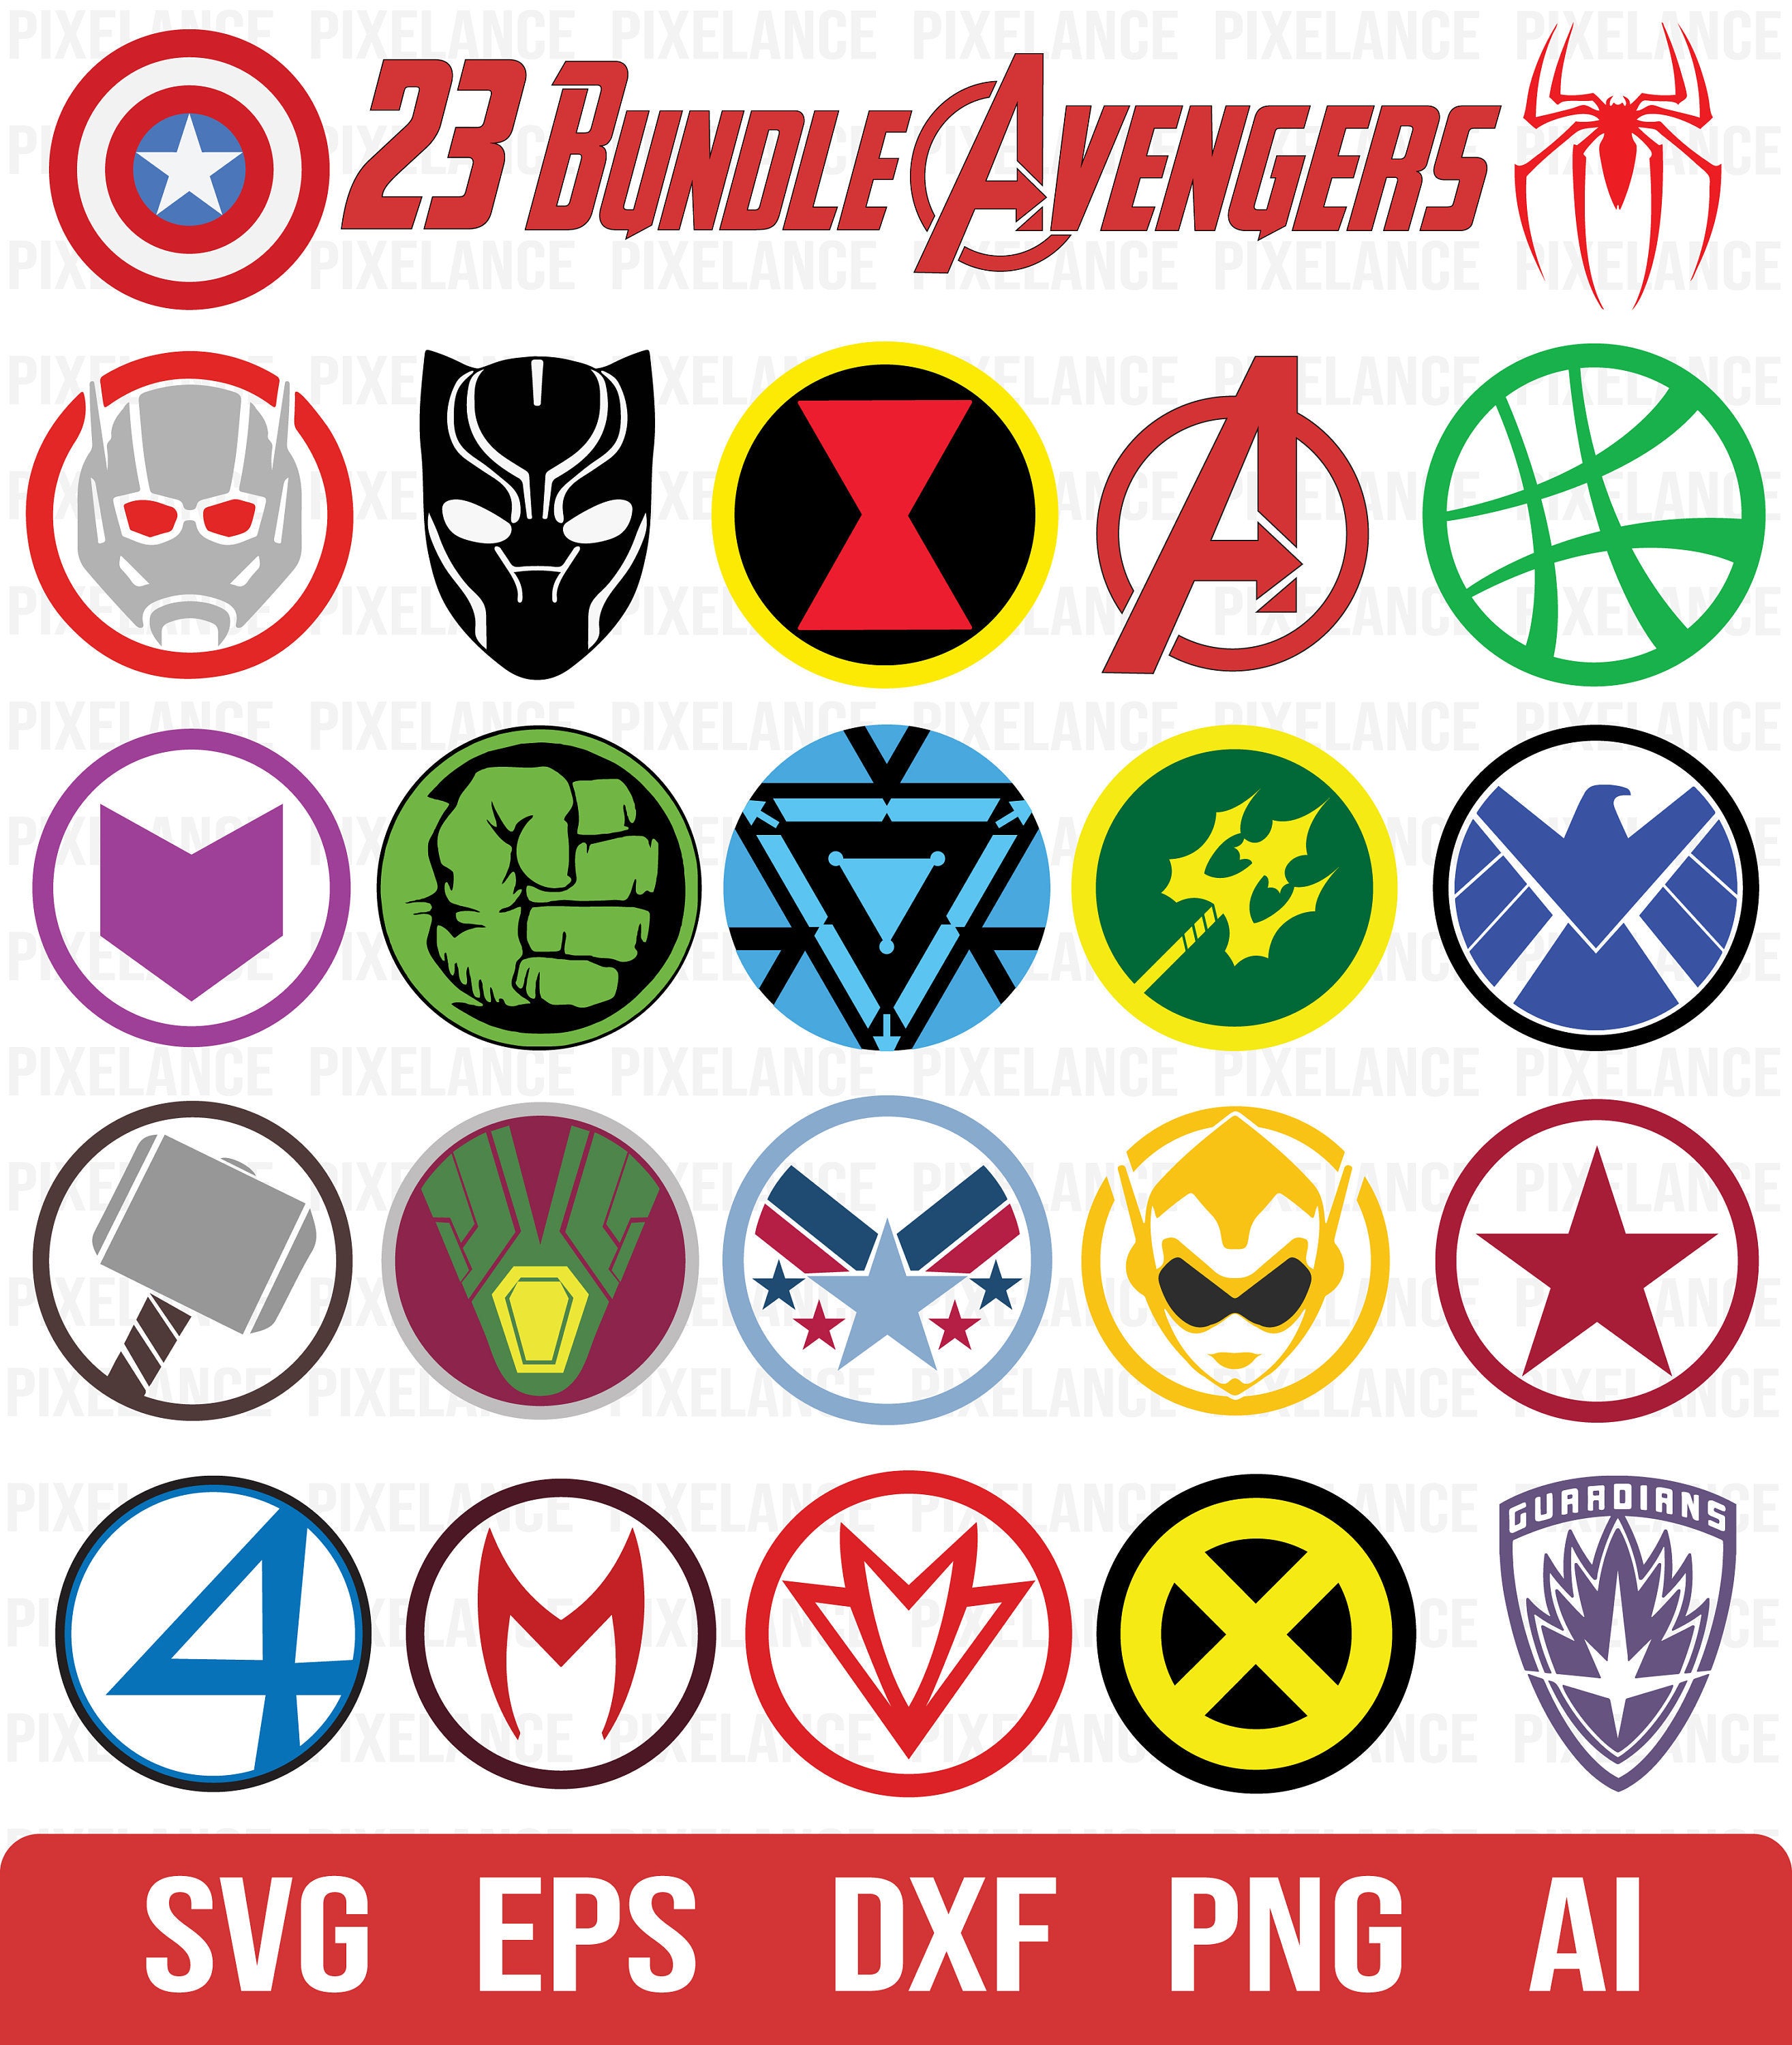 Vector Images for 'Avengers'. 